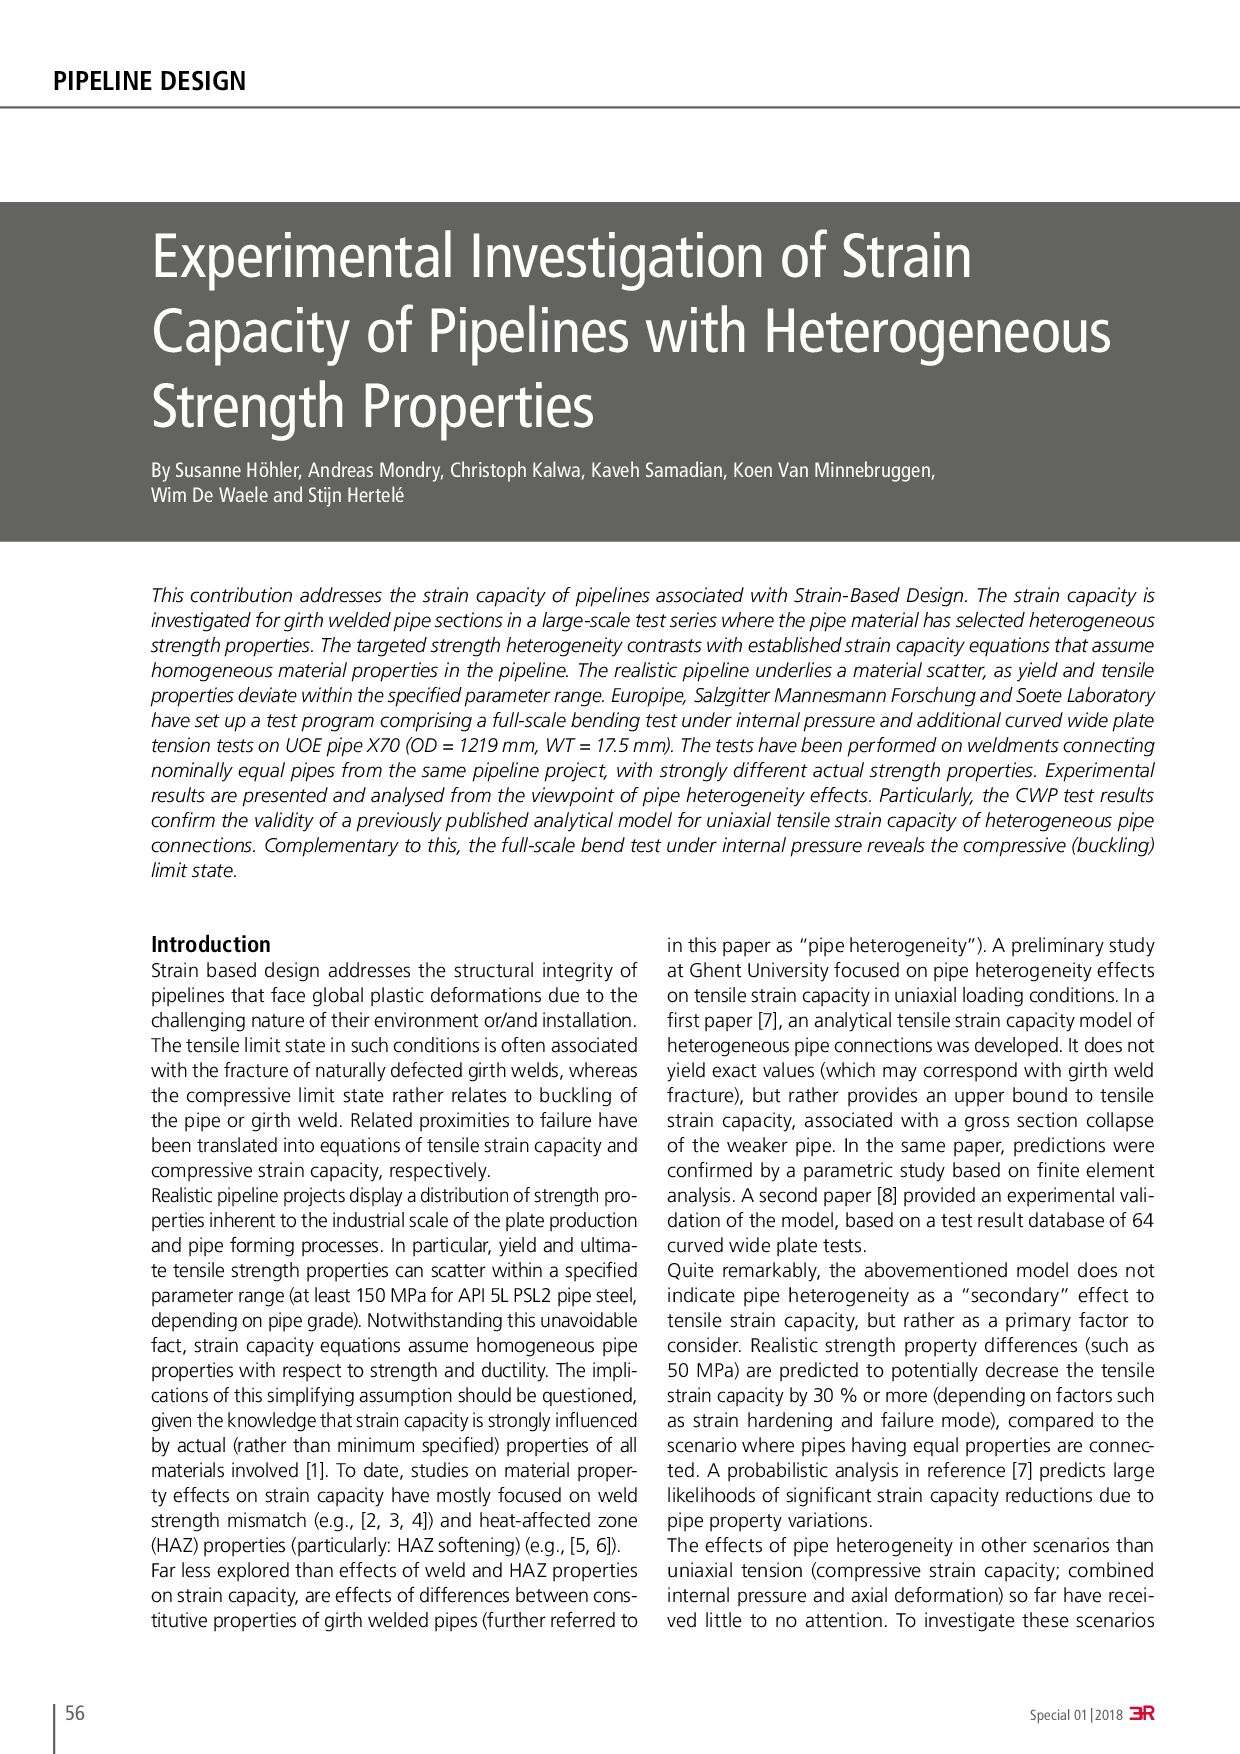 Experimental Investigation of Strain Capacity of Pipelines with Heterogeneous Strength Properties